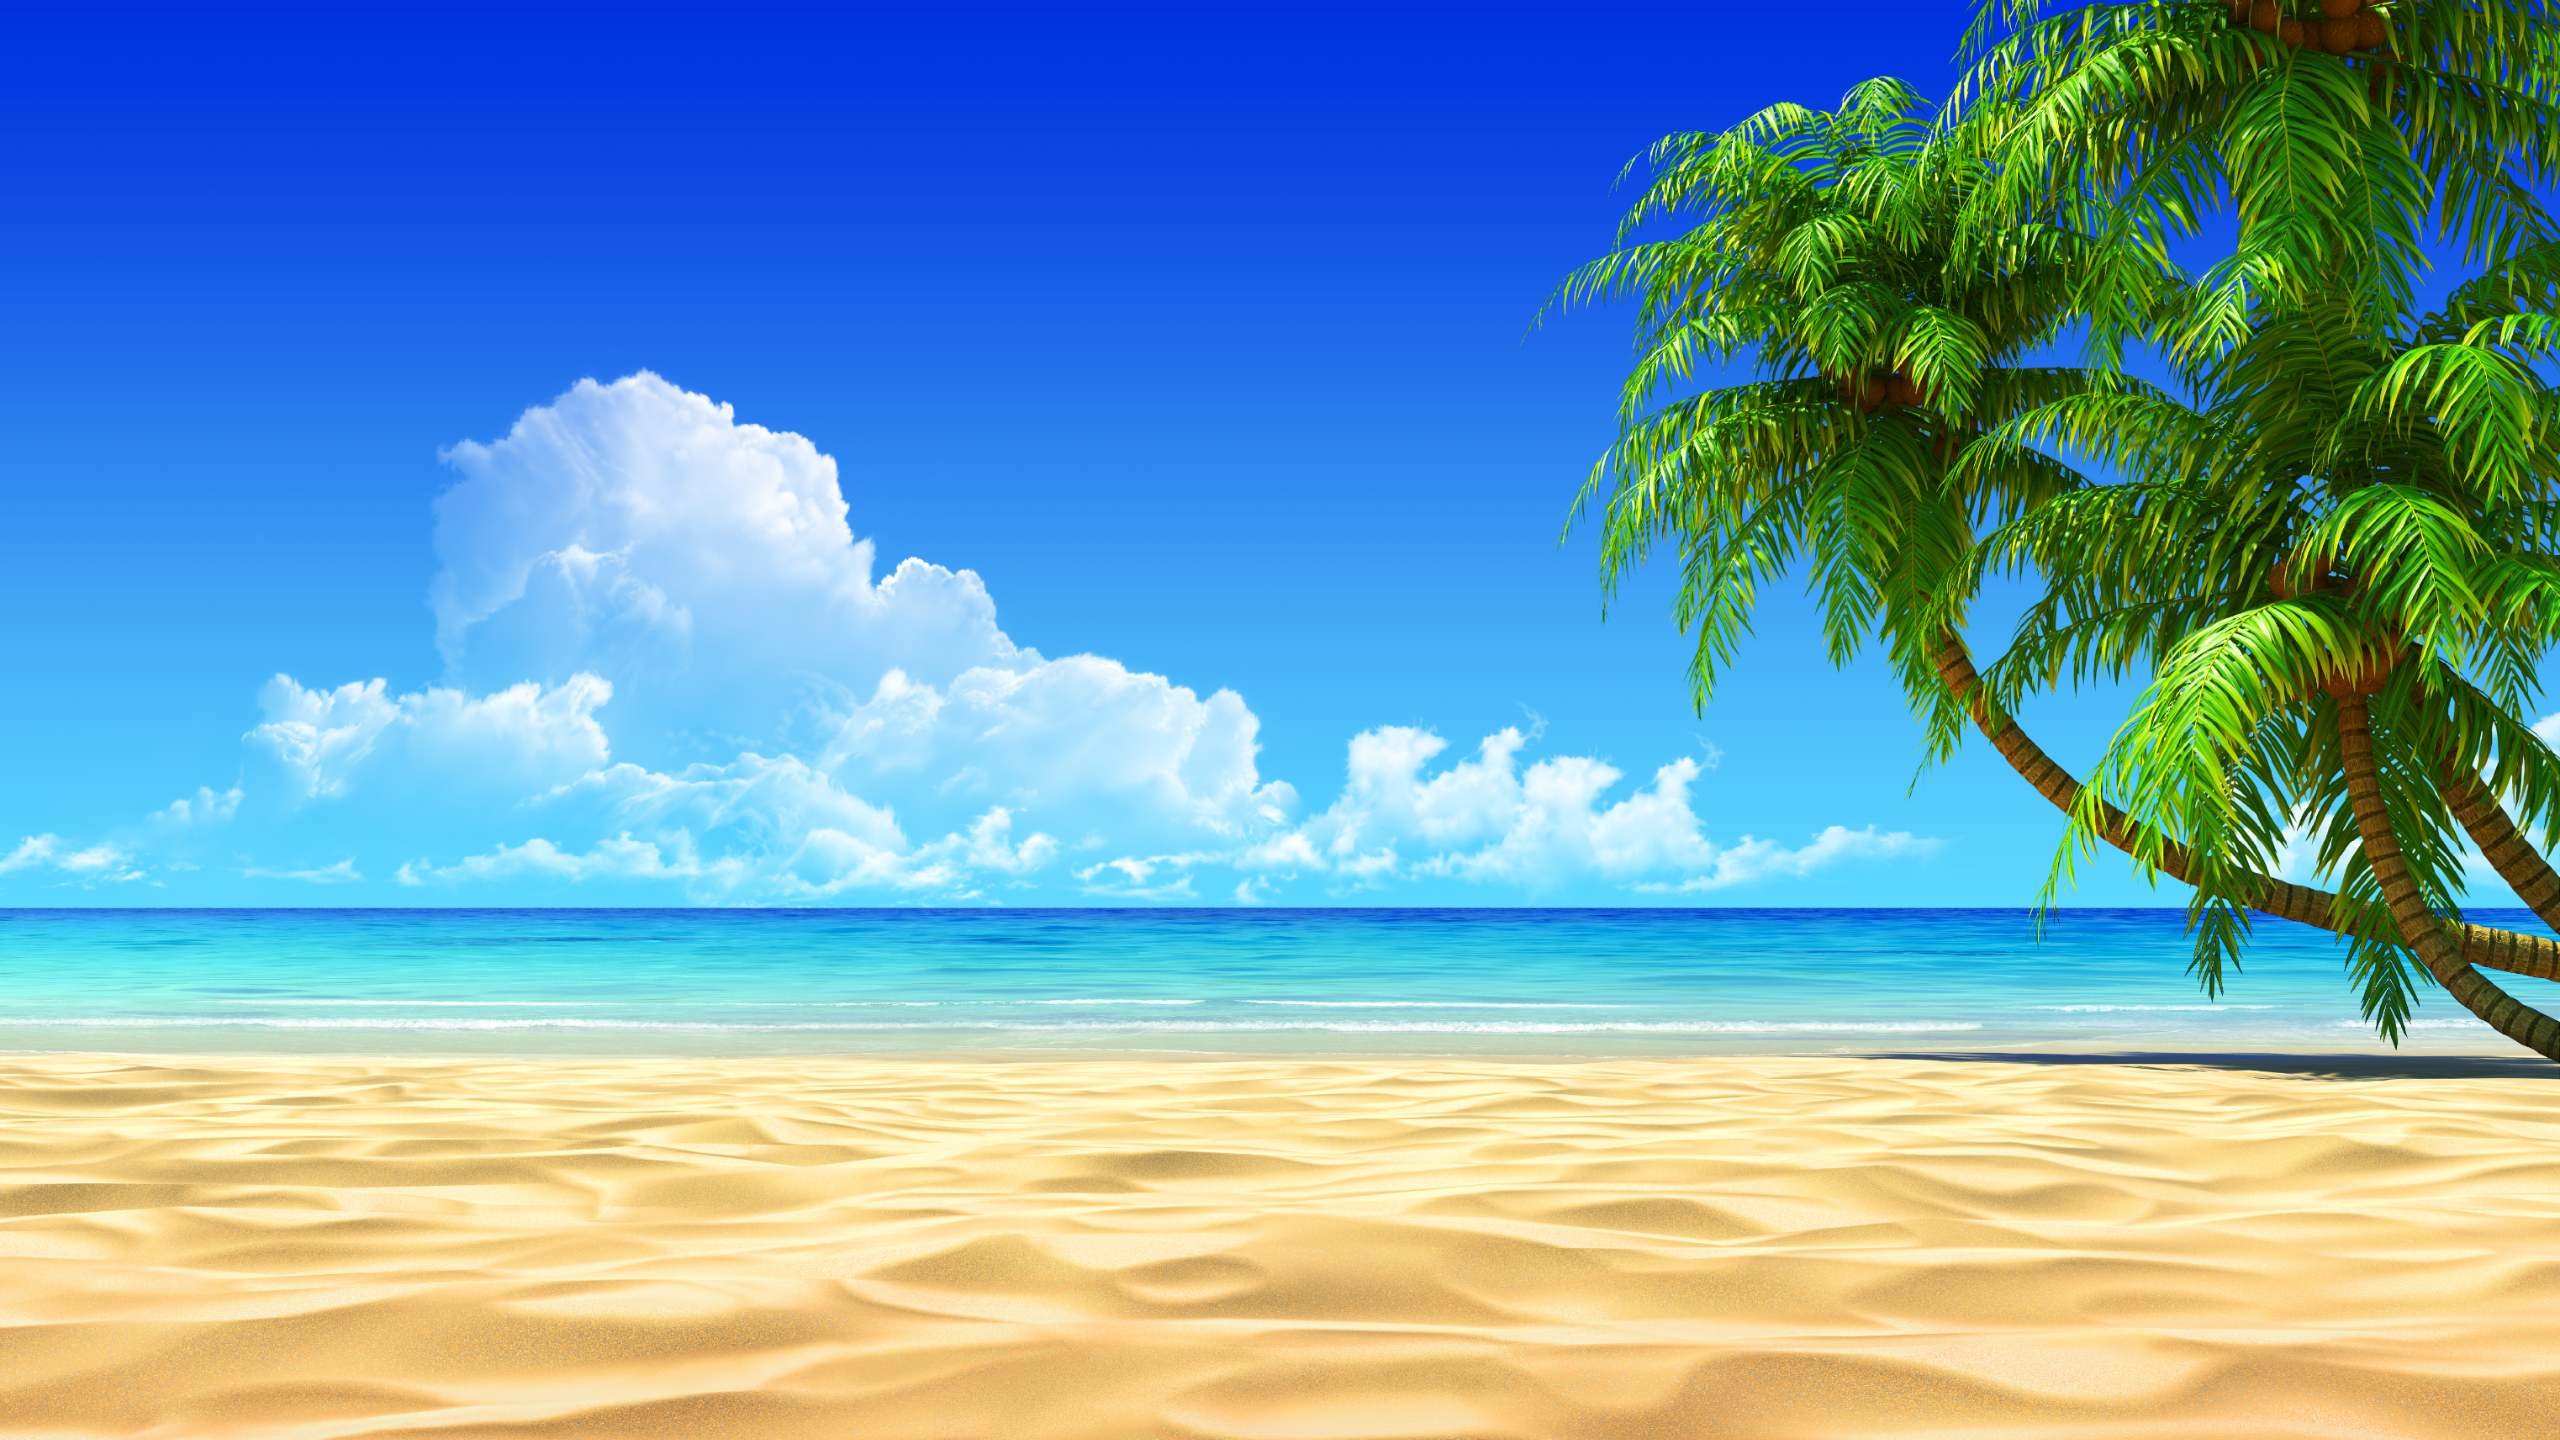 2560x1440 Awesome, Tropical, Beach, Desktop, Background, Hd, Wallpaper, Widescreen,  Images, Free, Download, Cool, Download Wallpaper, Stock Photos, ...